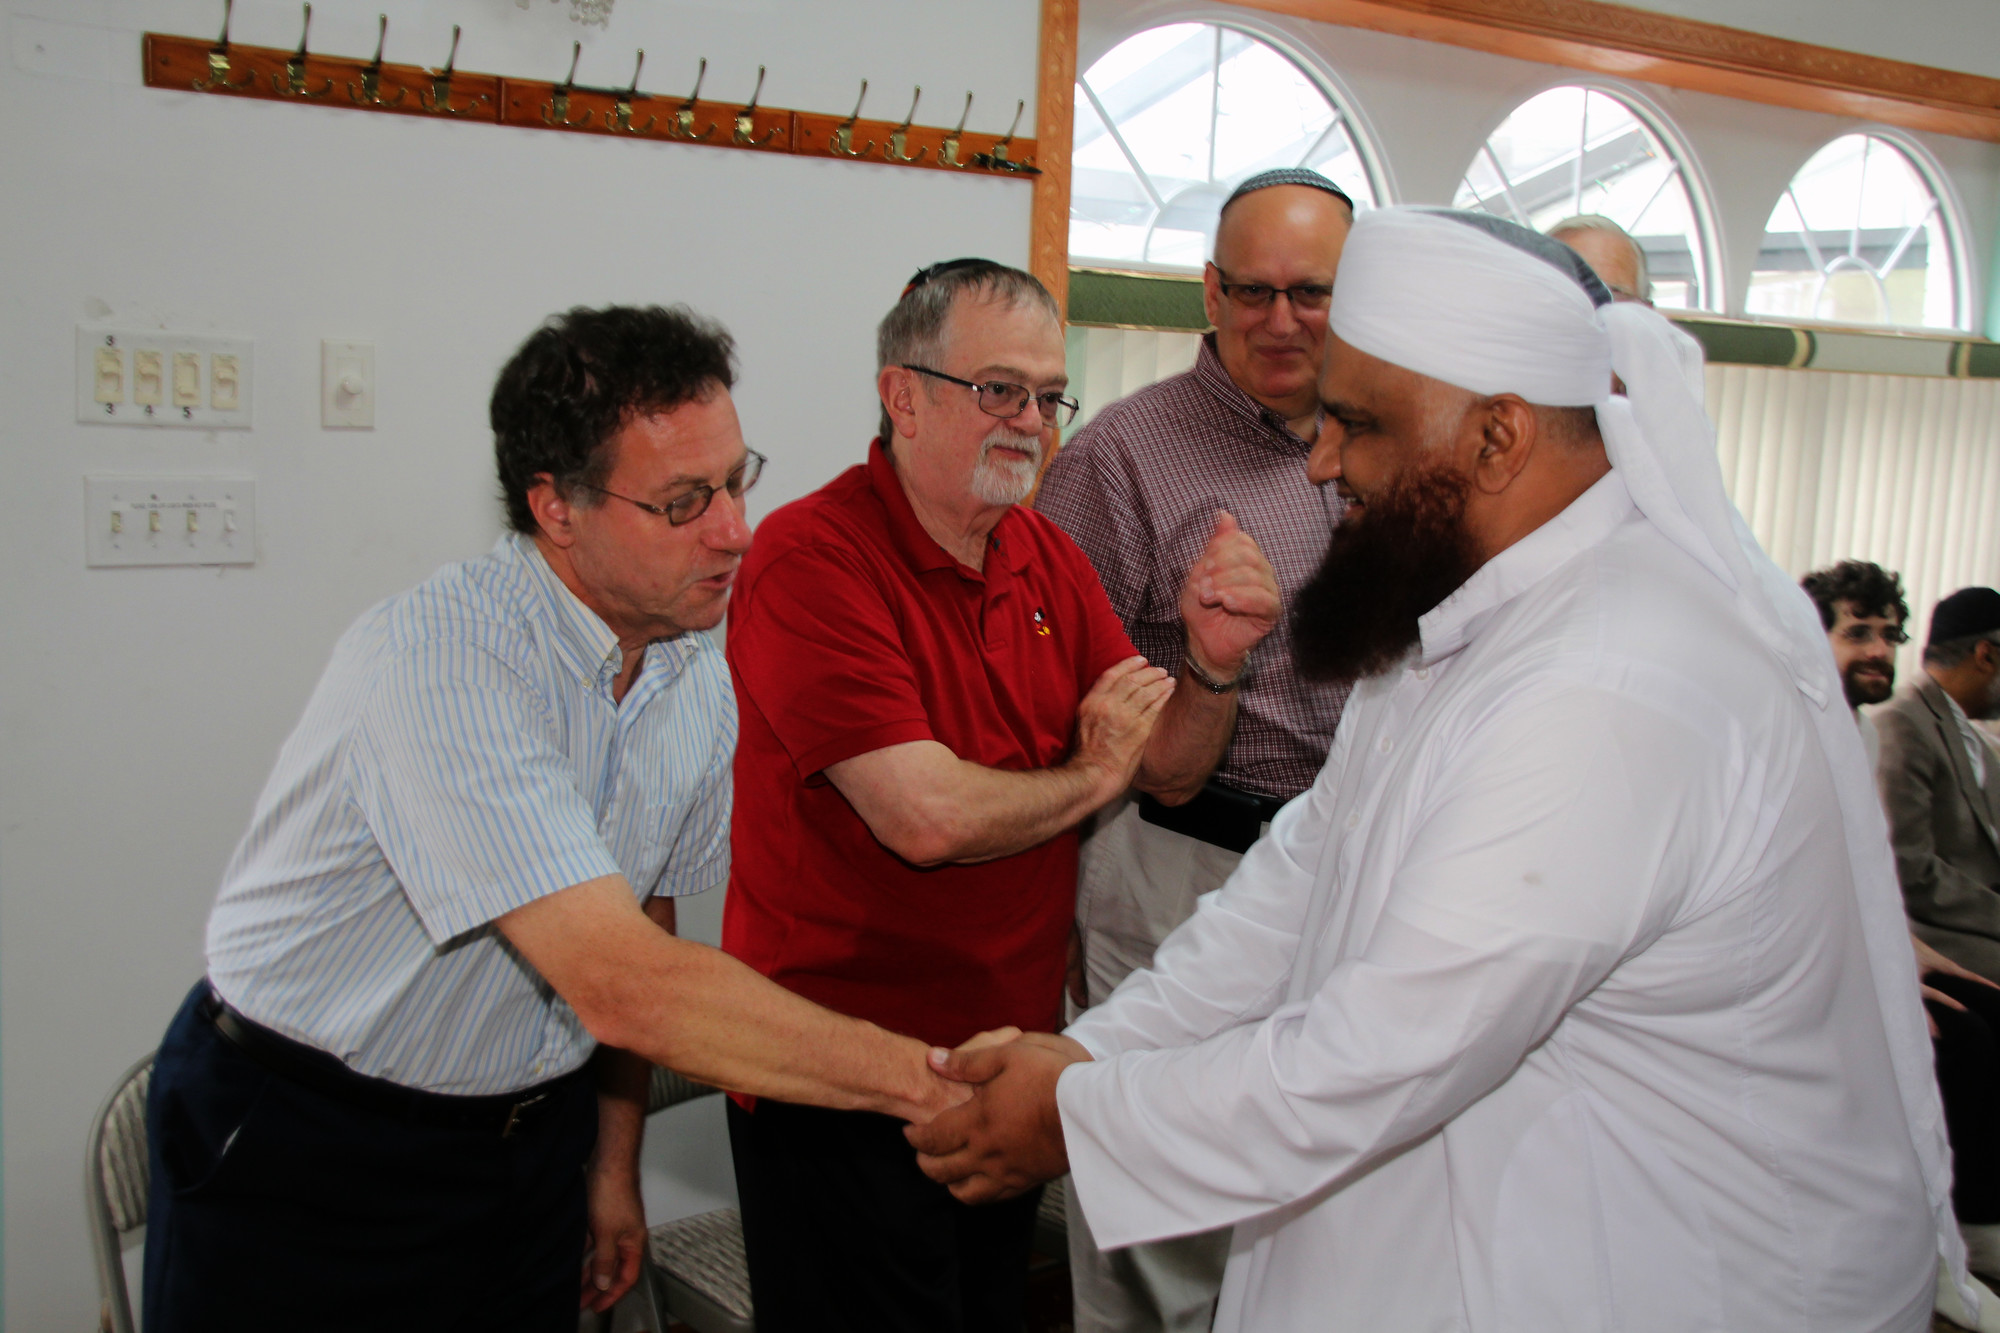 Imam Kashif Aziz greeted Steve Zwick and other members of Temple Beth-El to Jaam’e Masjid Bellmore for an Aug. 23 prayer service.